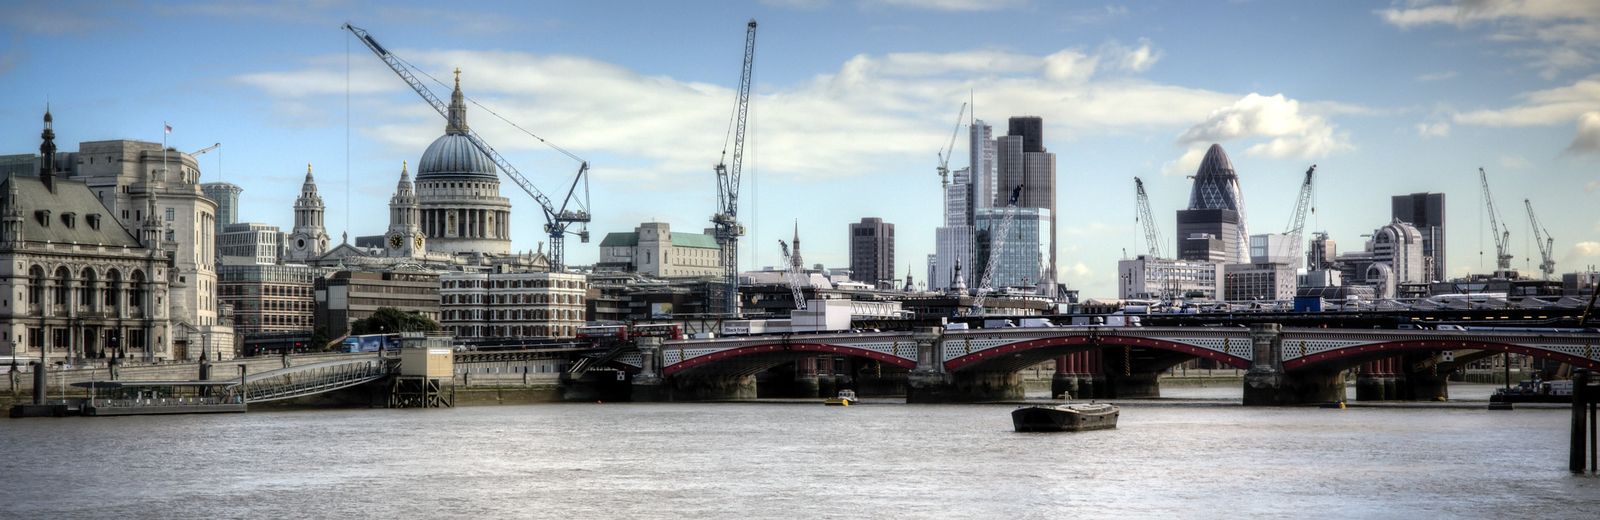 Image of the Thames and London skyline